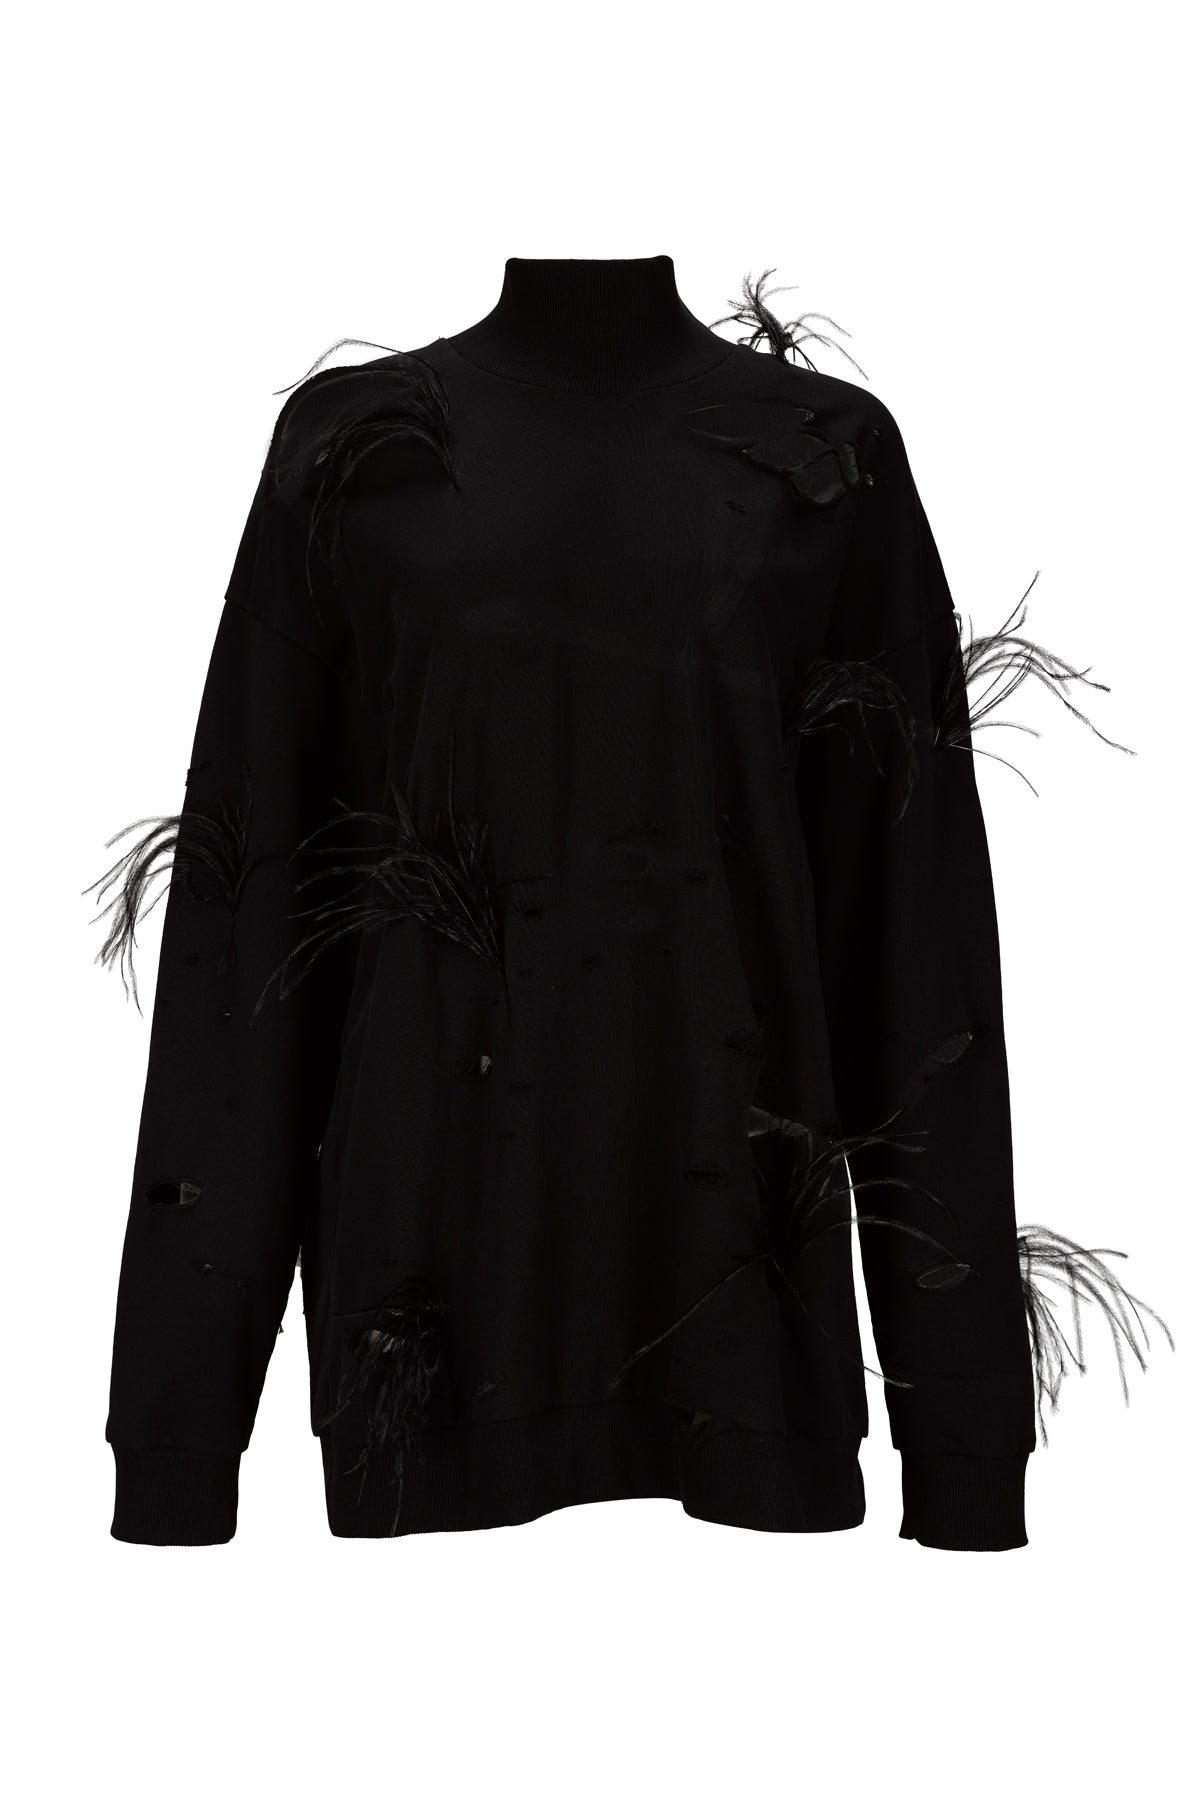 BLACK DISTRESSED TURTLENECK WITH FEATHERS MARQUES ALMEIDA